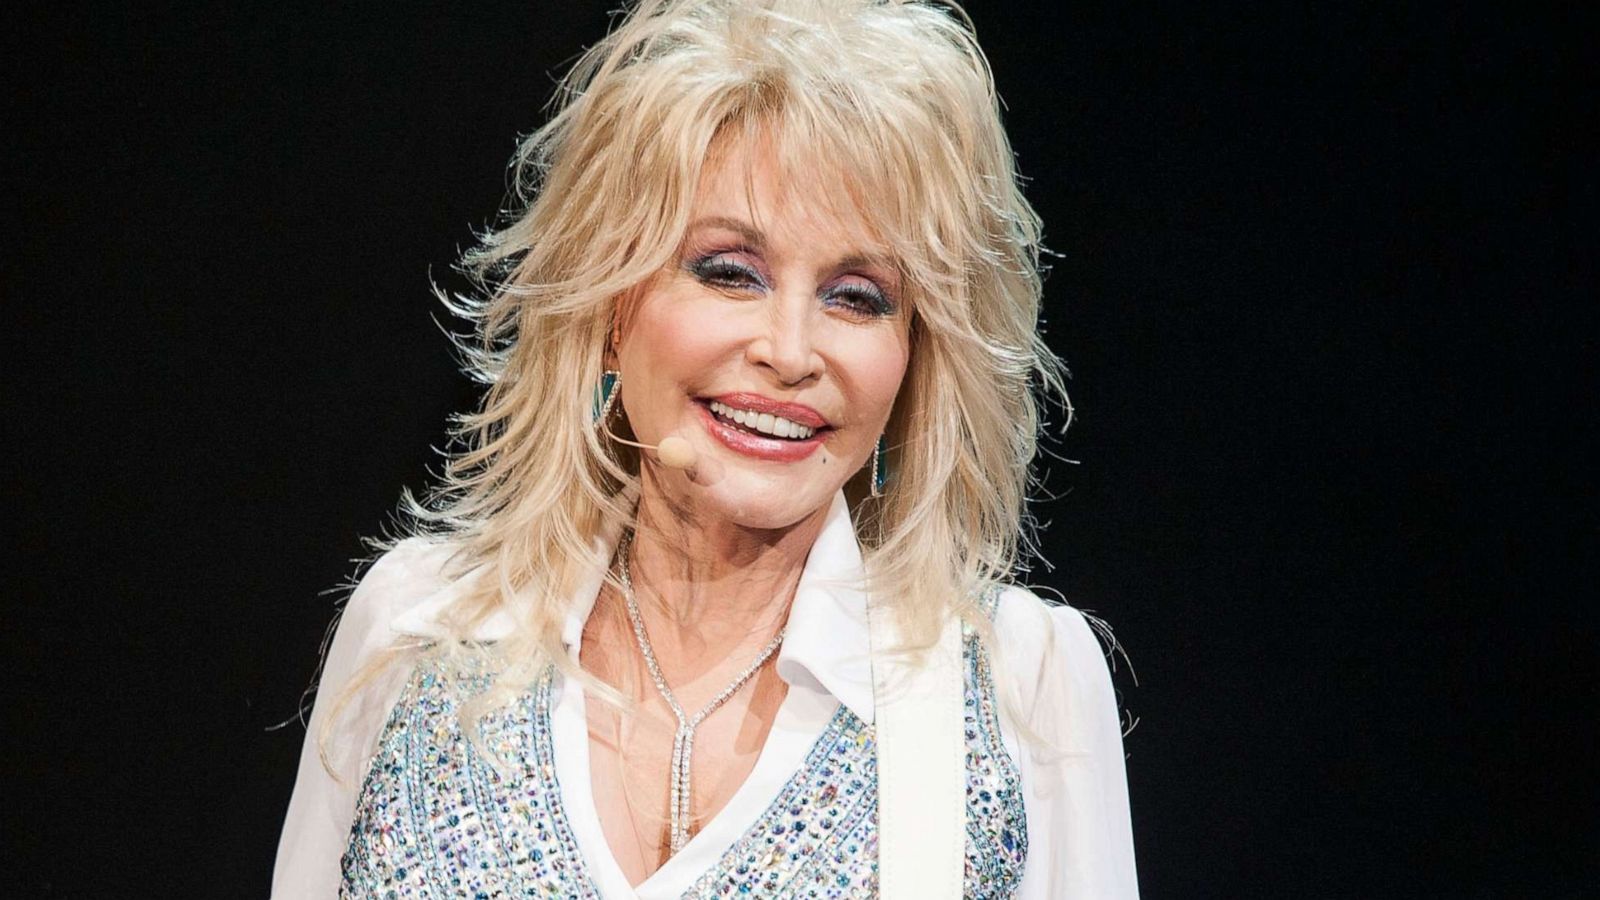 Dolly Parton Having Sex - Dolly Parton pokes fun at her 54-year marriage with Carl Thomas Dean: 'I'm  sure he's sick of me' - Good Morning America